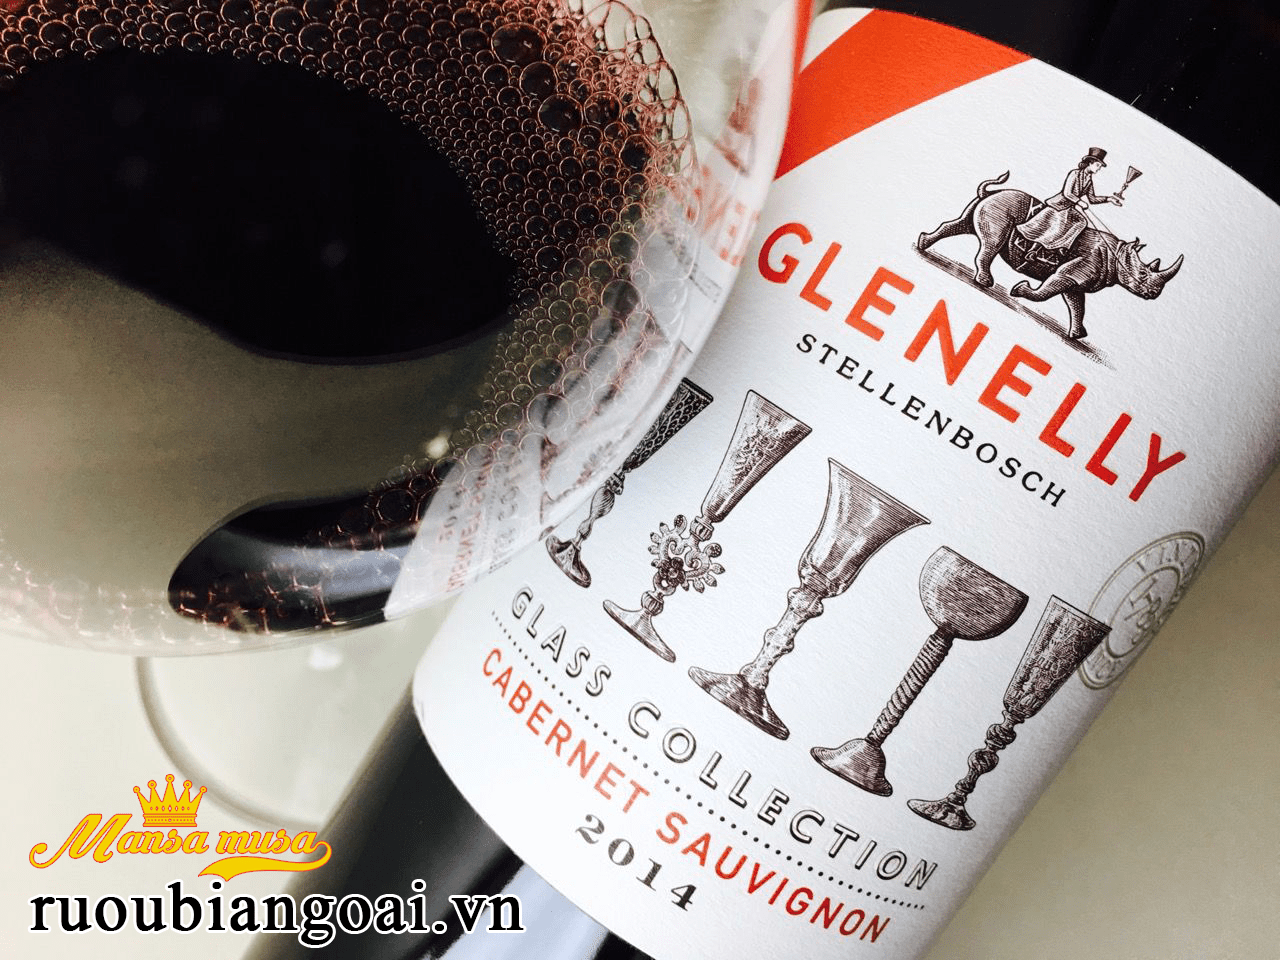 Vang Glenelly Glass Collection Cabernet Sauvignon 2014